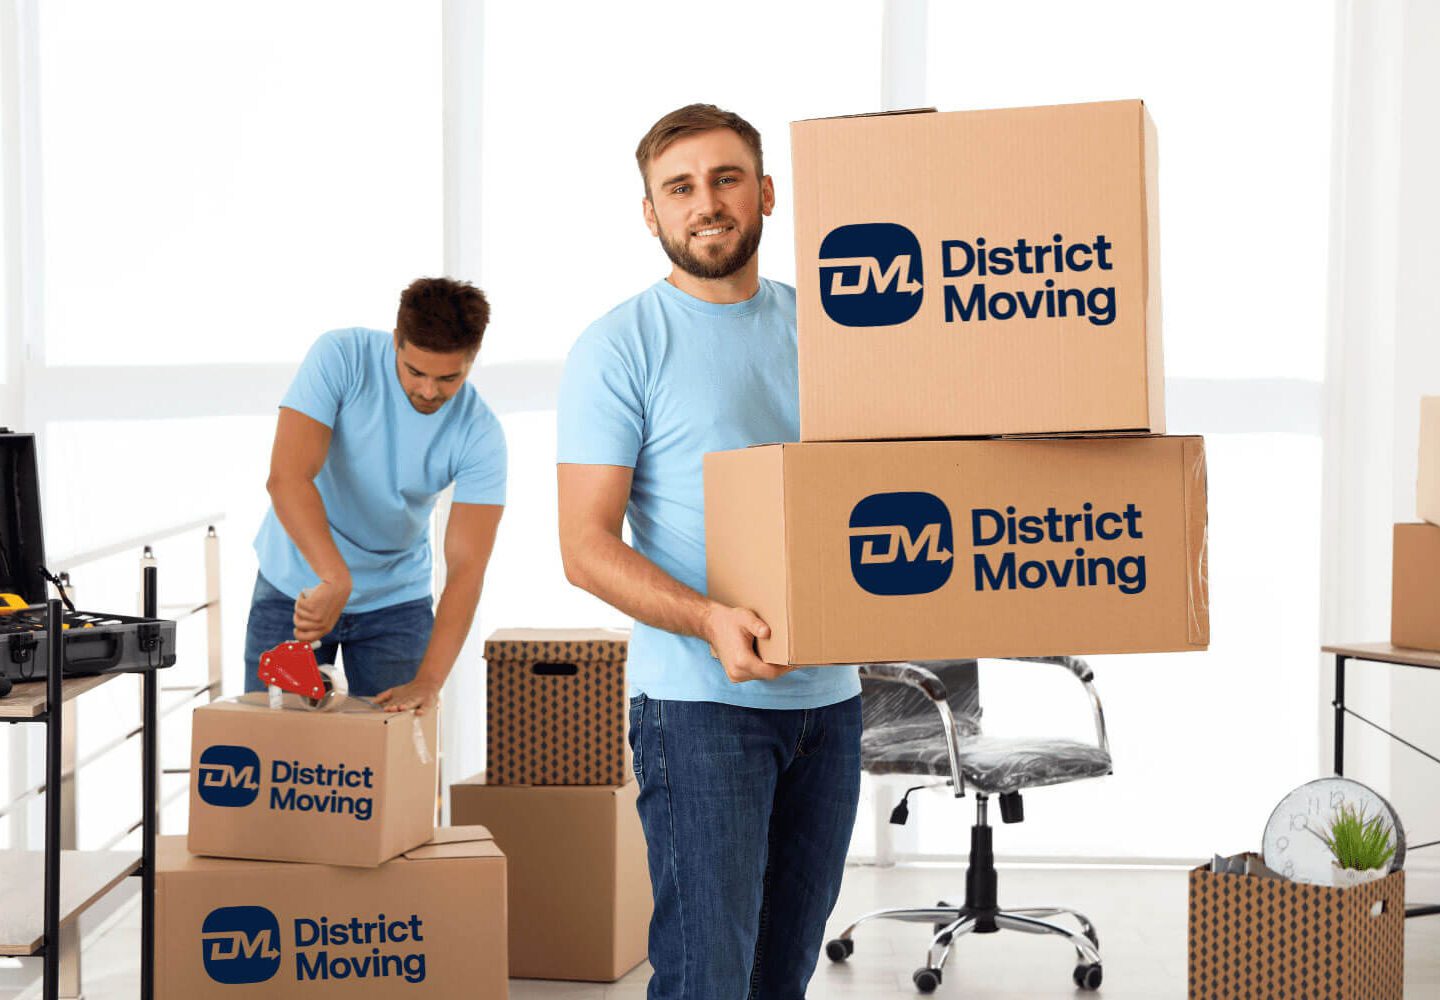 People packing in District Moving boxes